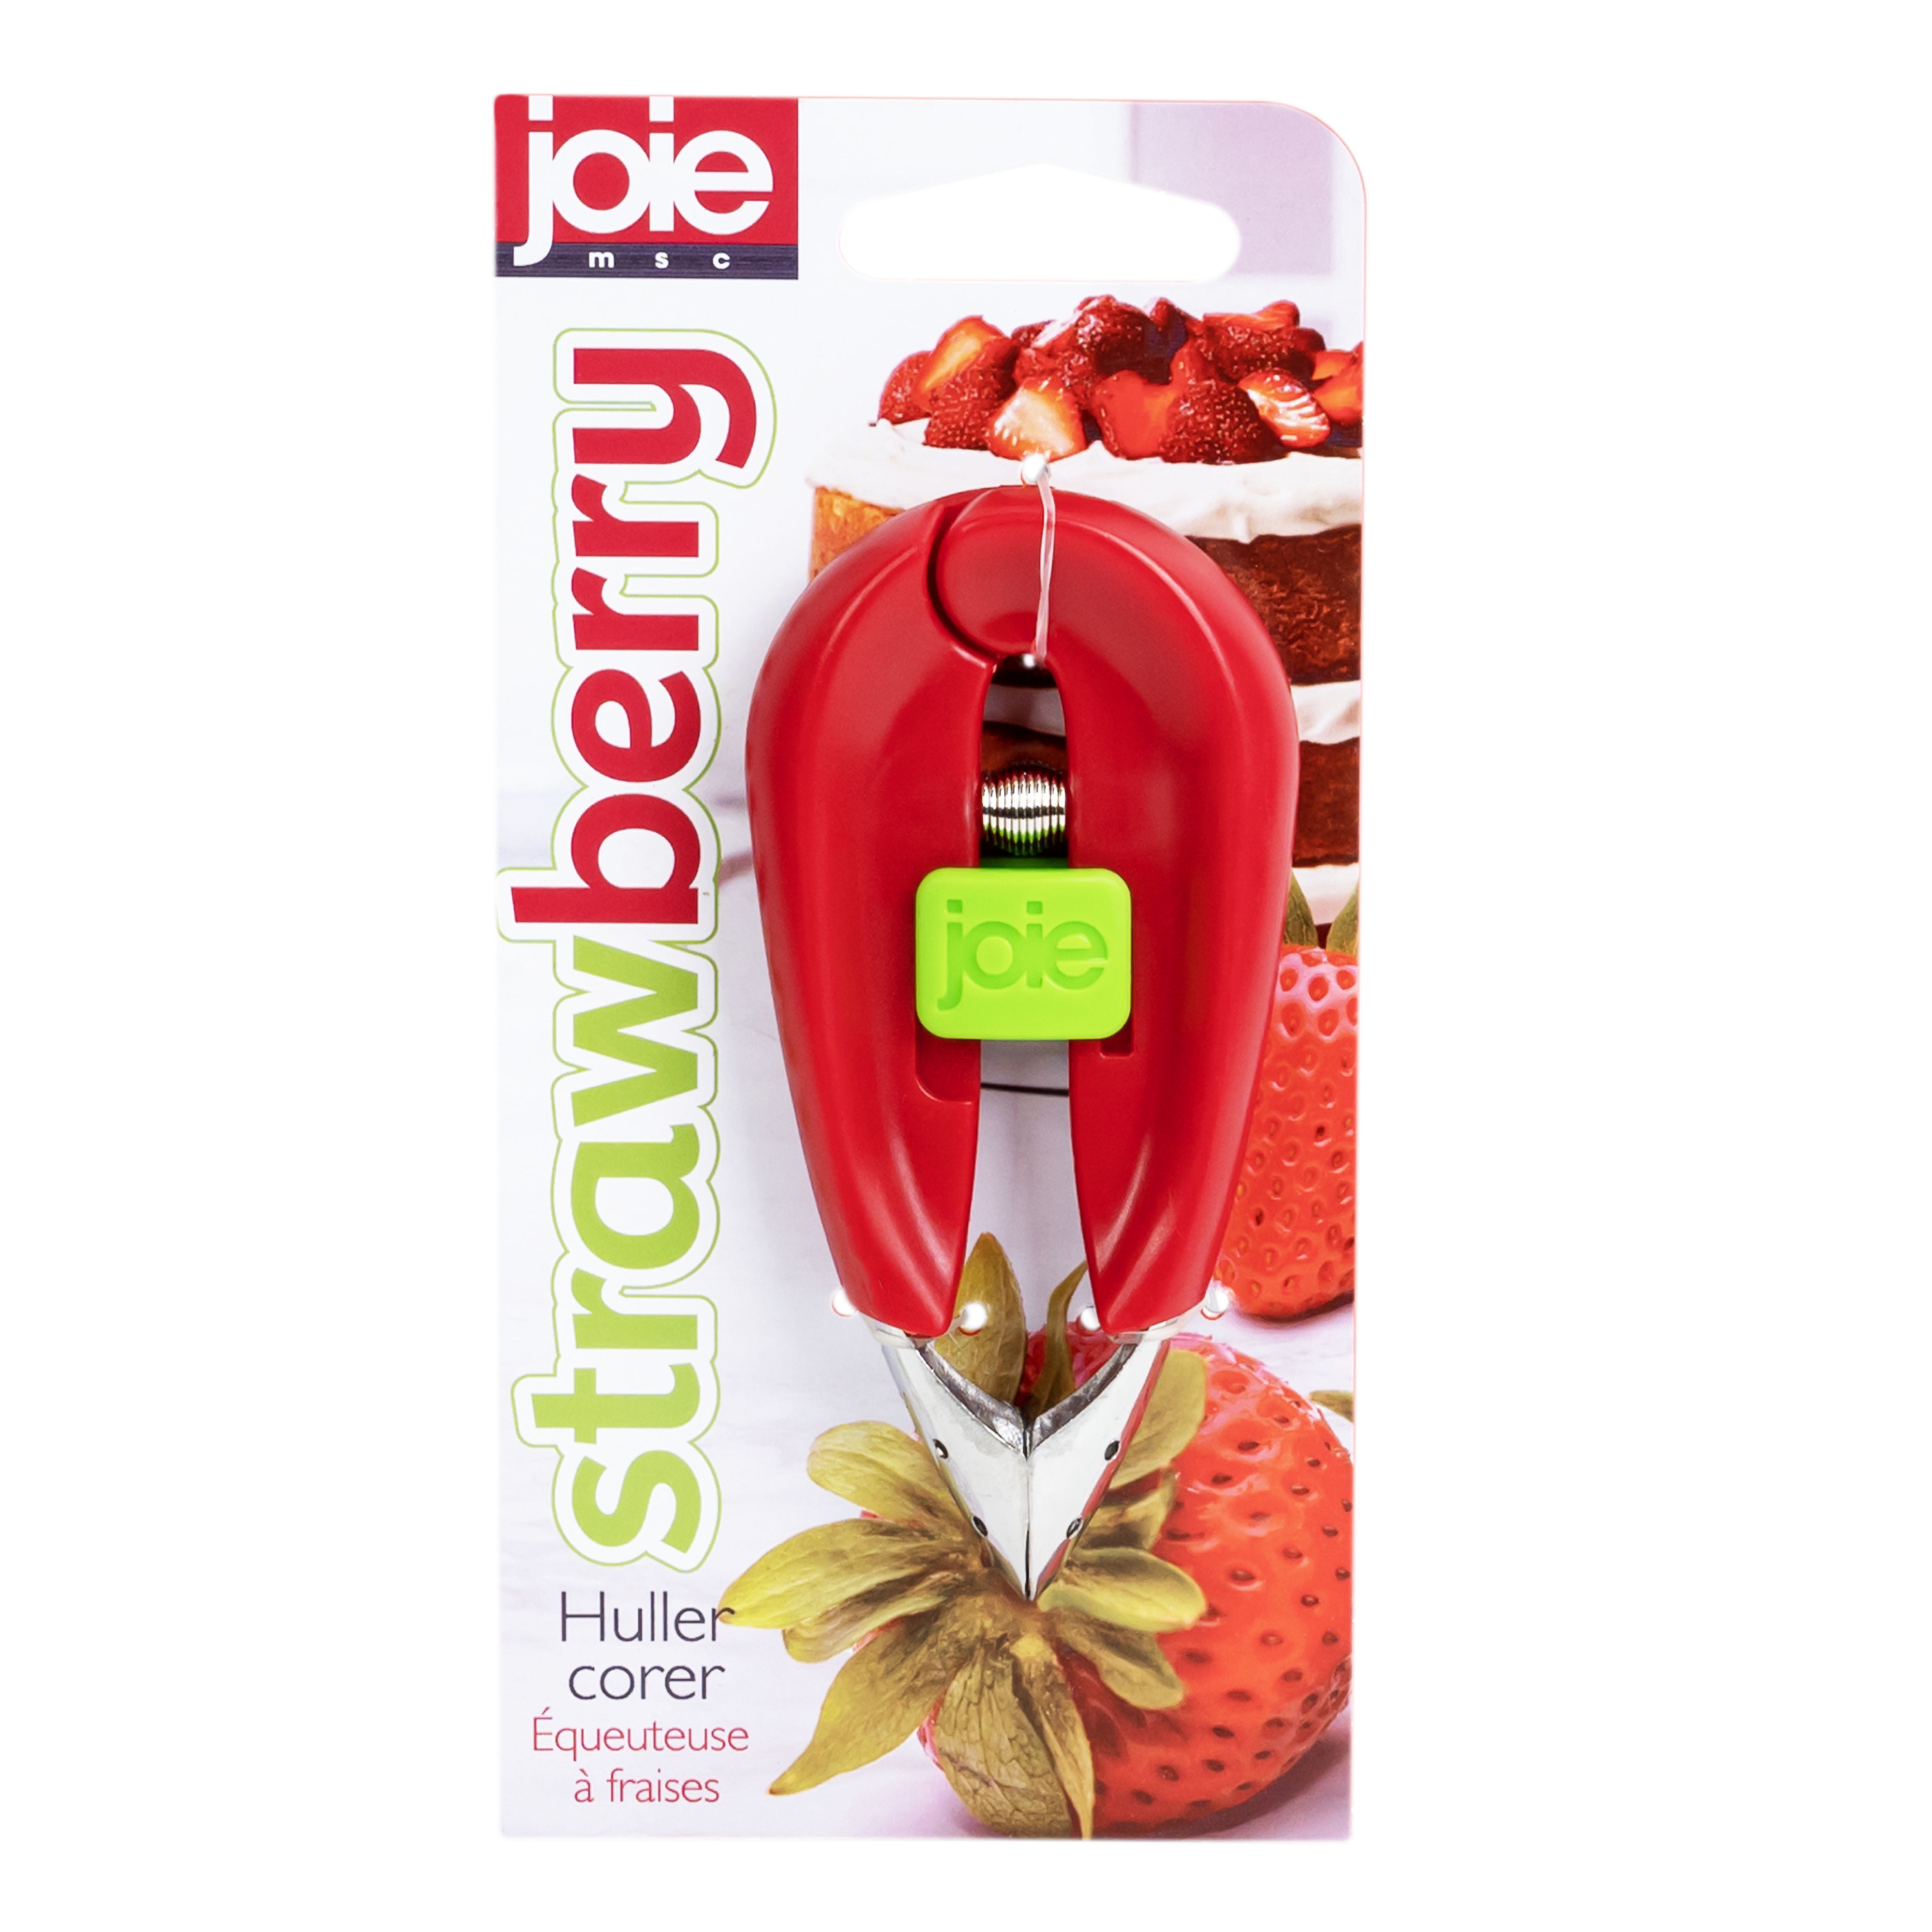 Joie Strawberry Hull and Slice